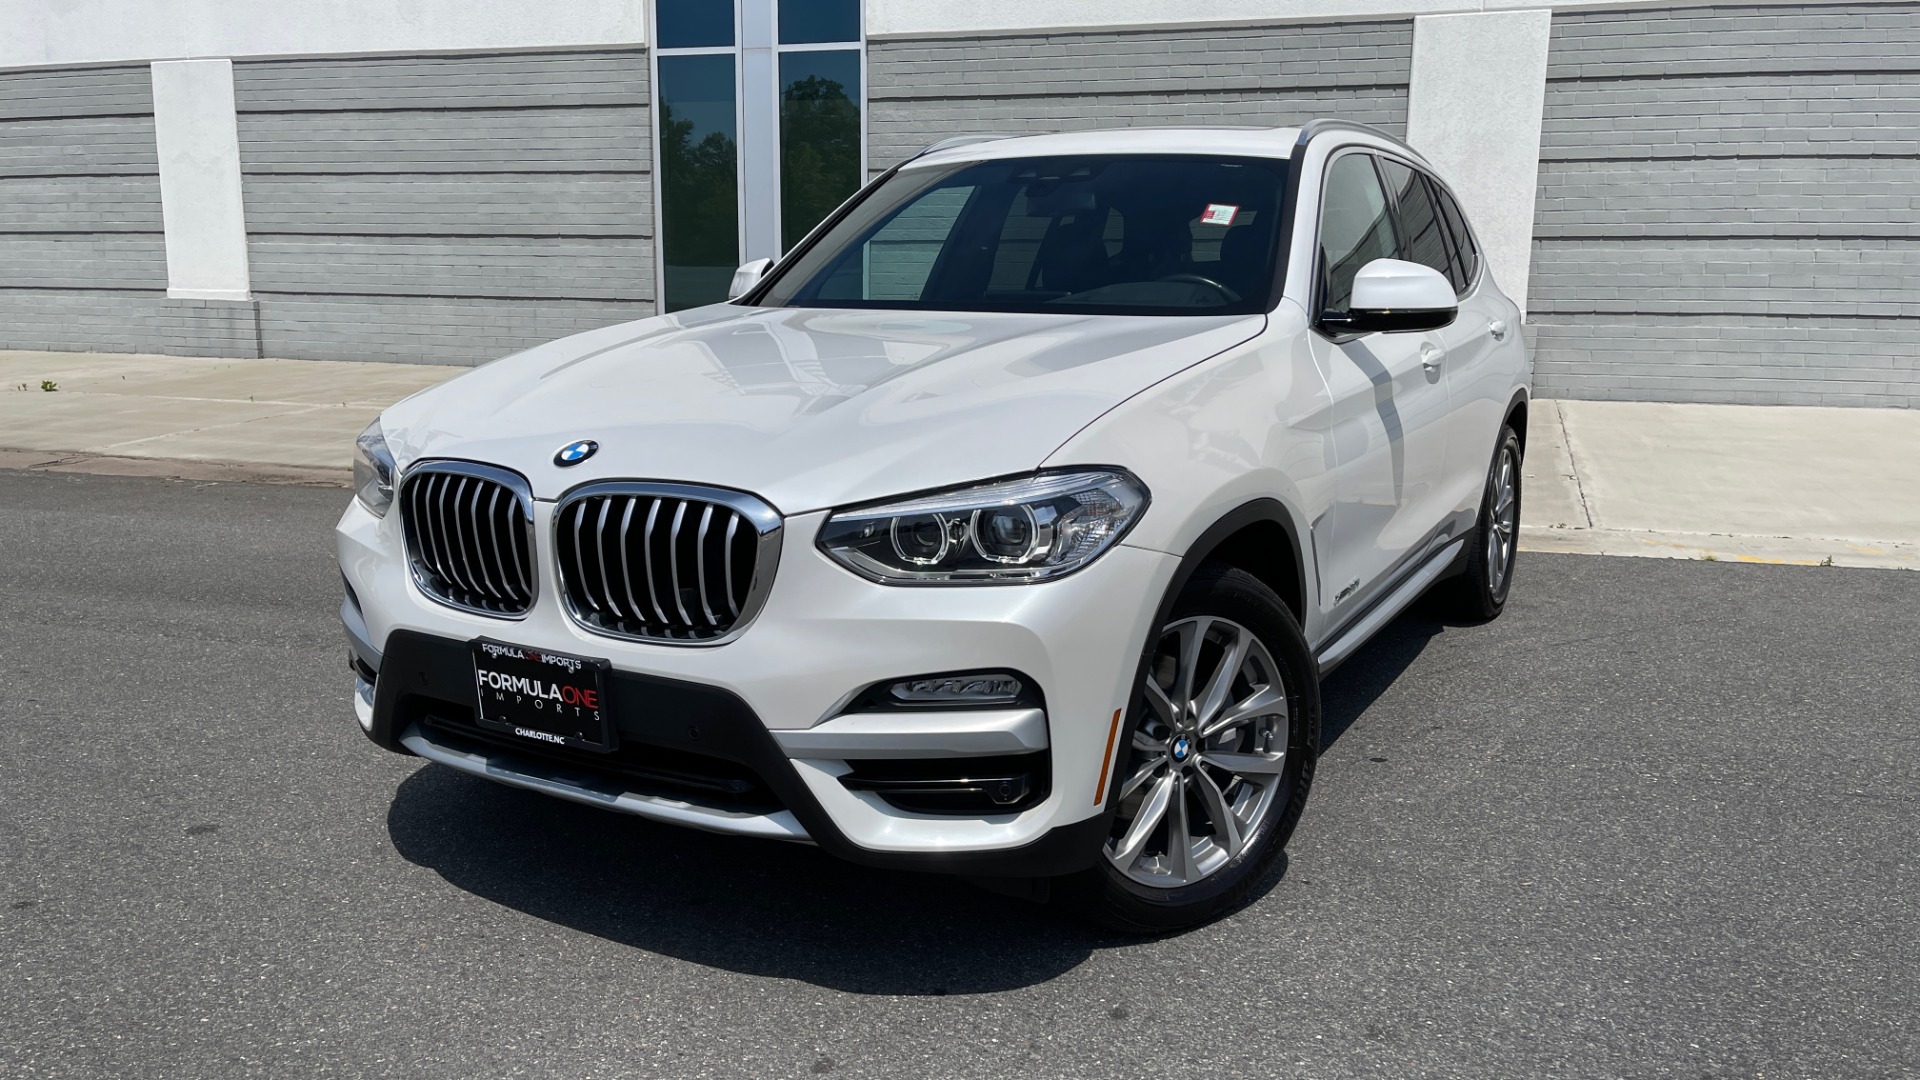 Used 2018 BMW X3 XDRIVE30I PREMIUM / NAV / DRVR ASST / CONV PKG / SUNROOF / REARVIEW for sale Sold at Formula Imports in Charlotte NC 28227 1